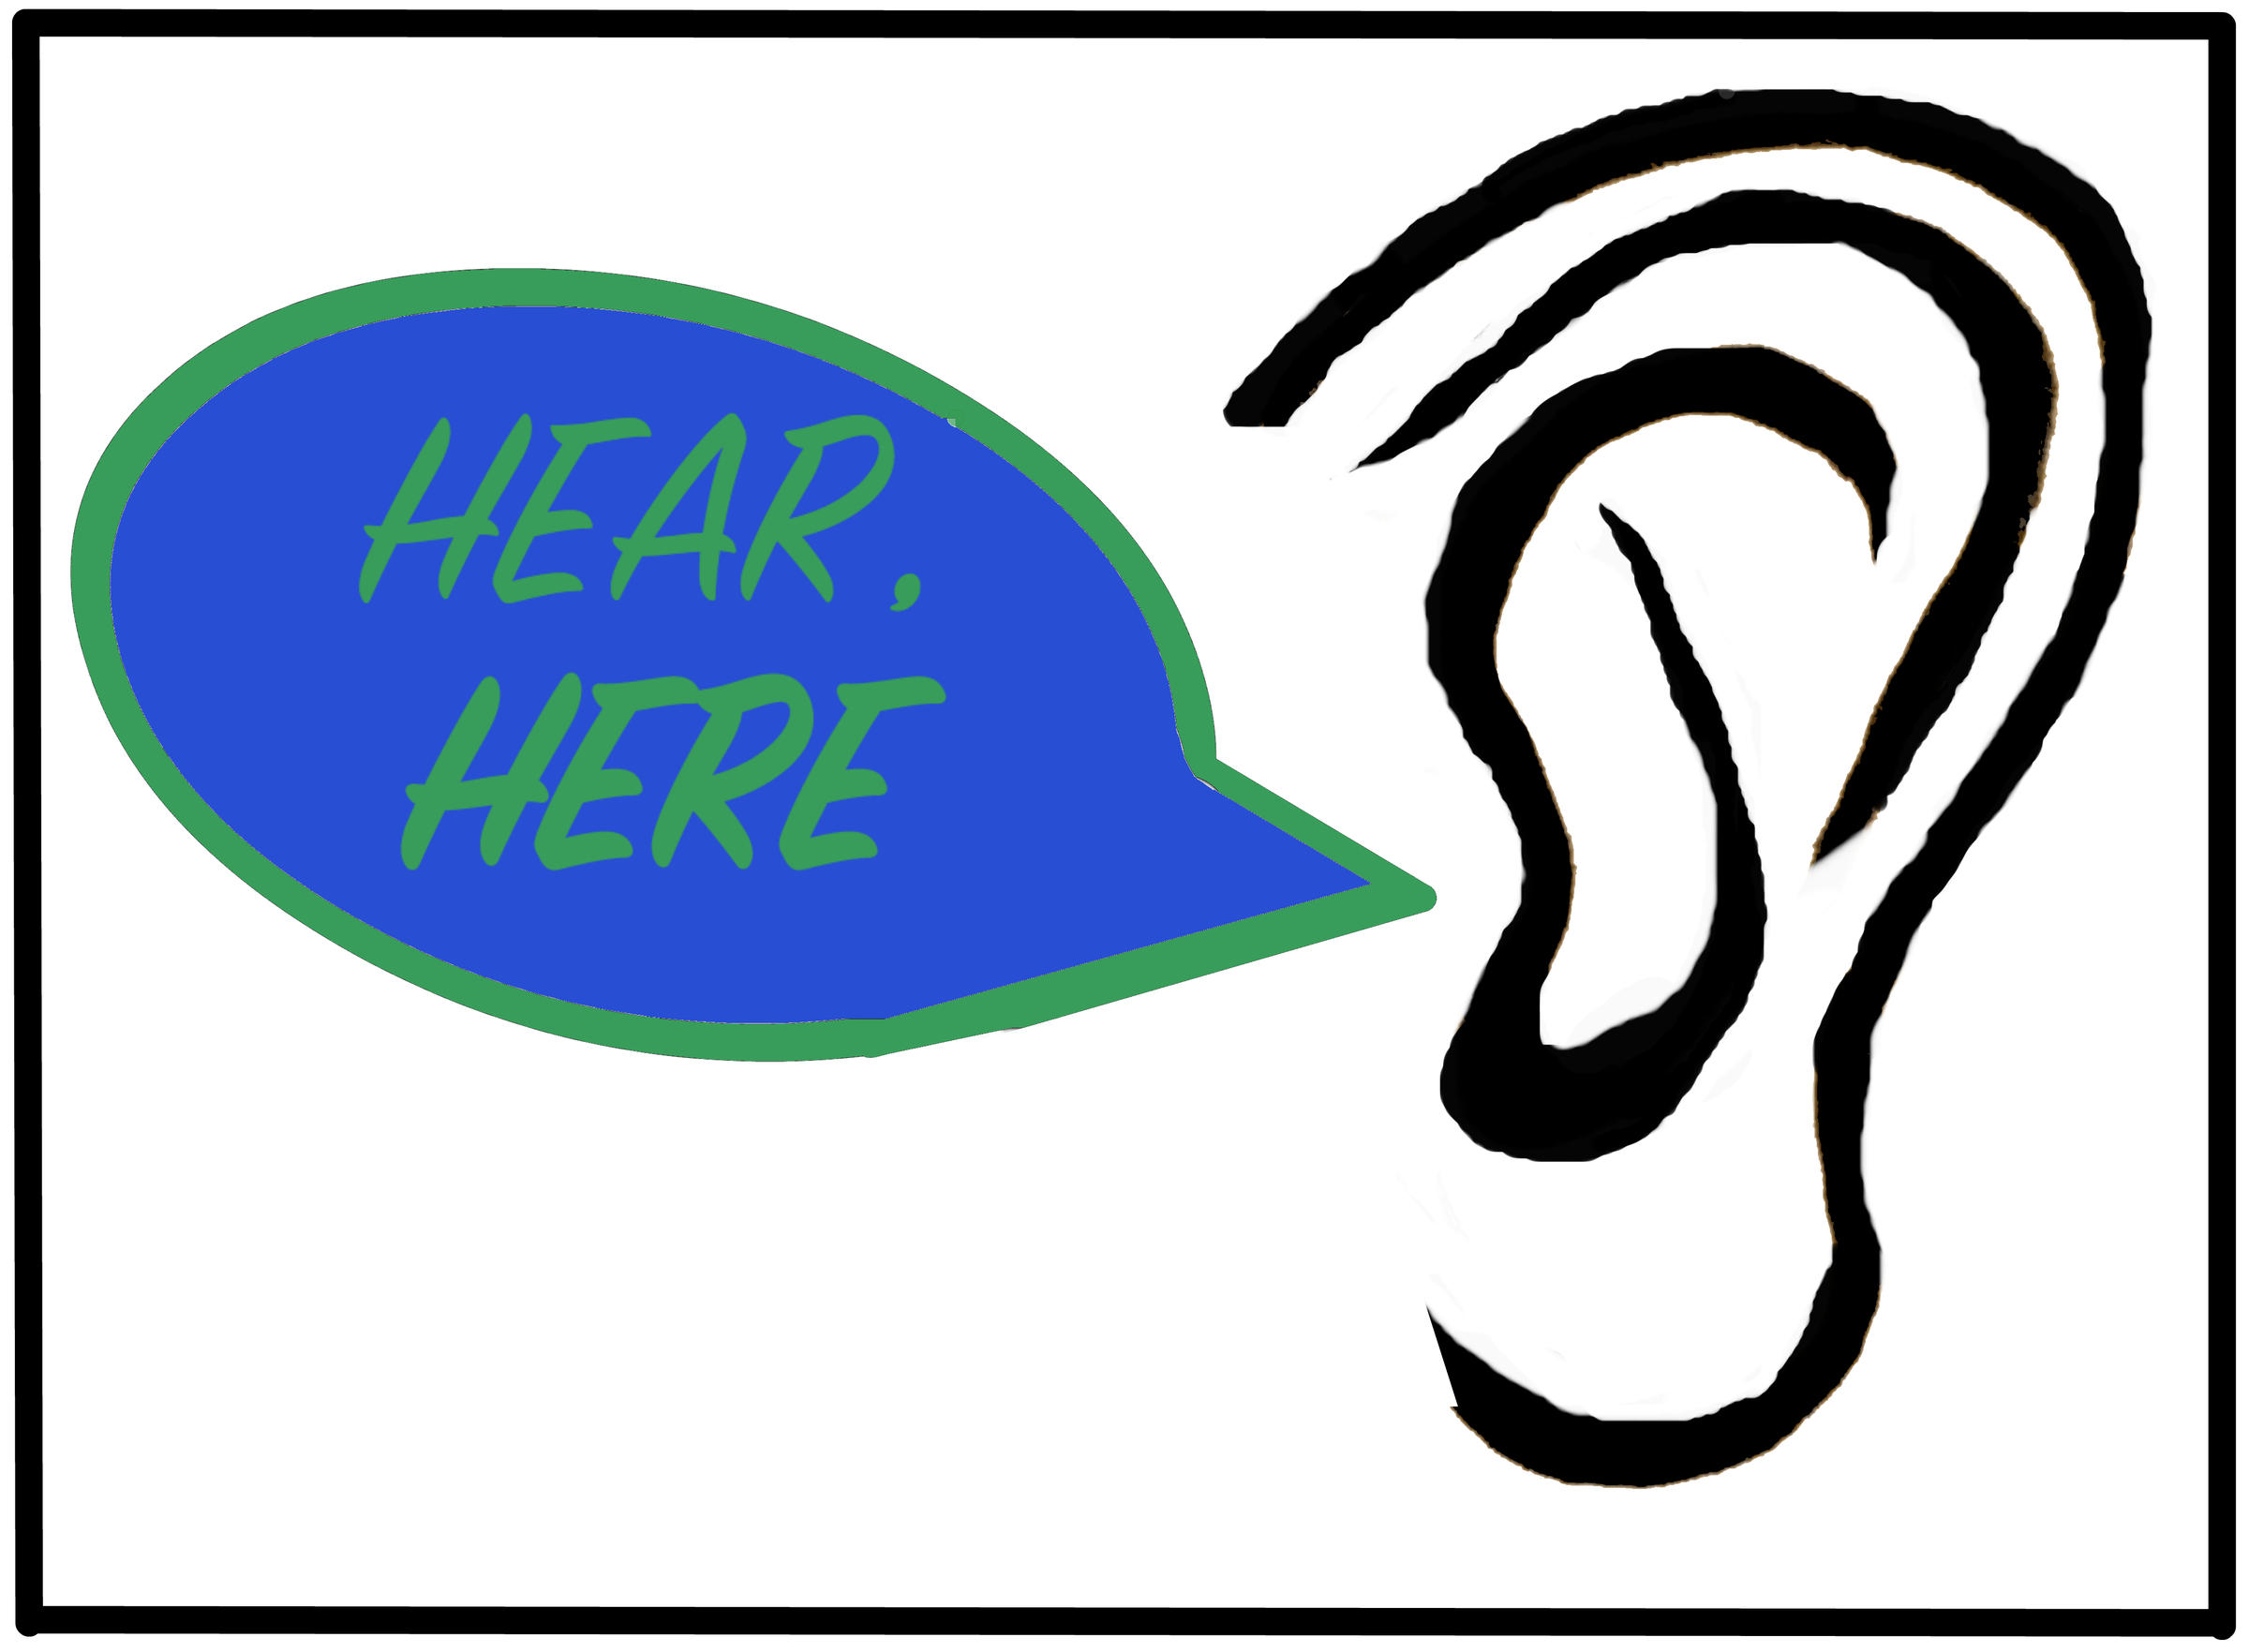 Lend an ear to Current State's new 'Hear, Here' project | WKAR